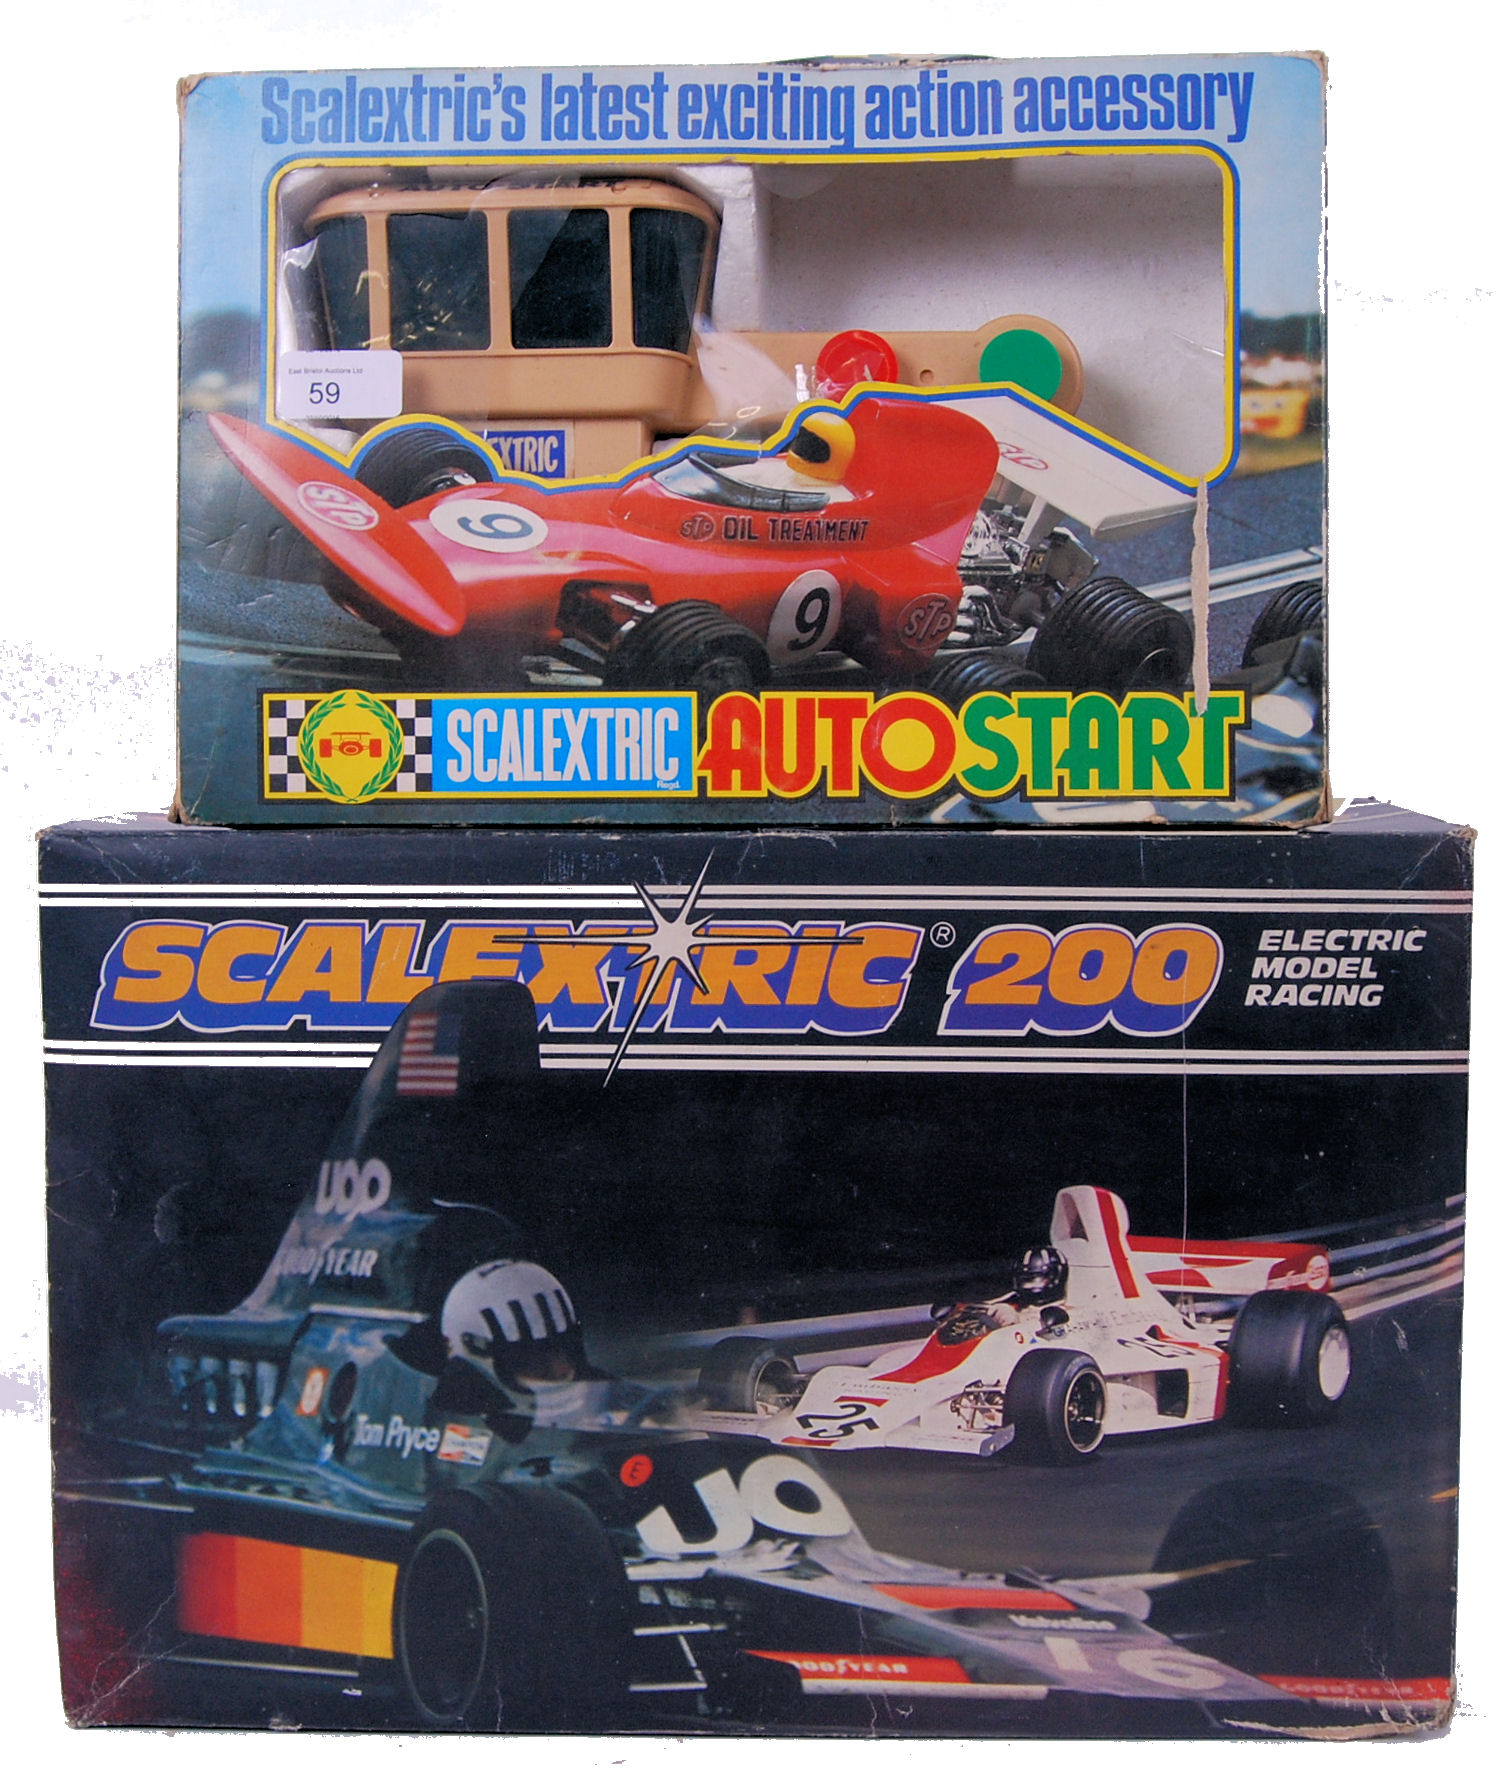 SCALEXTRIC: An original vintage Scalextric set 200 - complete with both cars, in the original box.